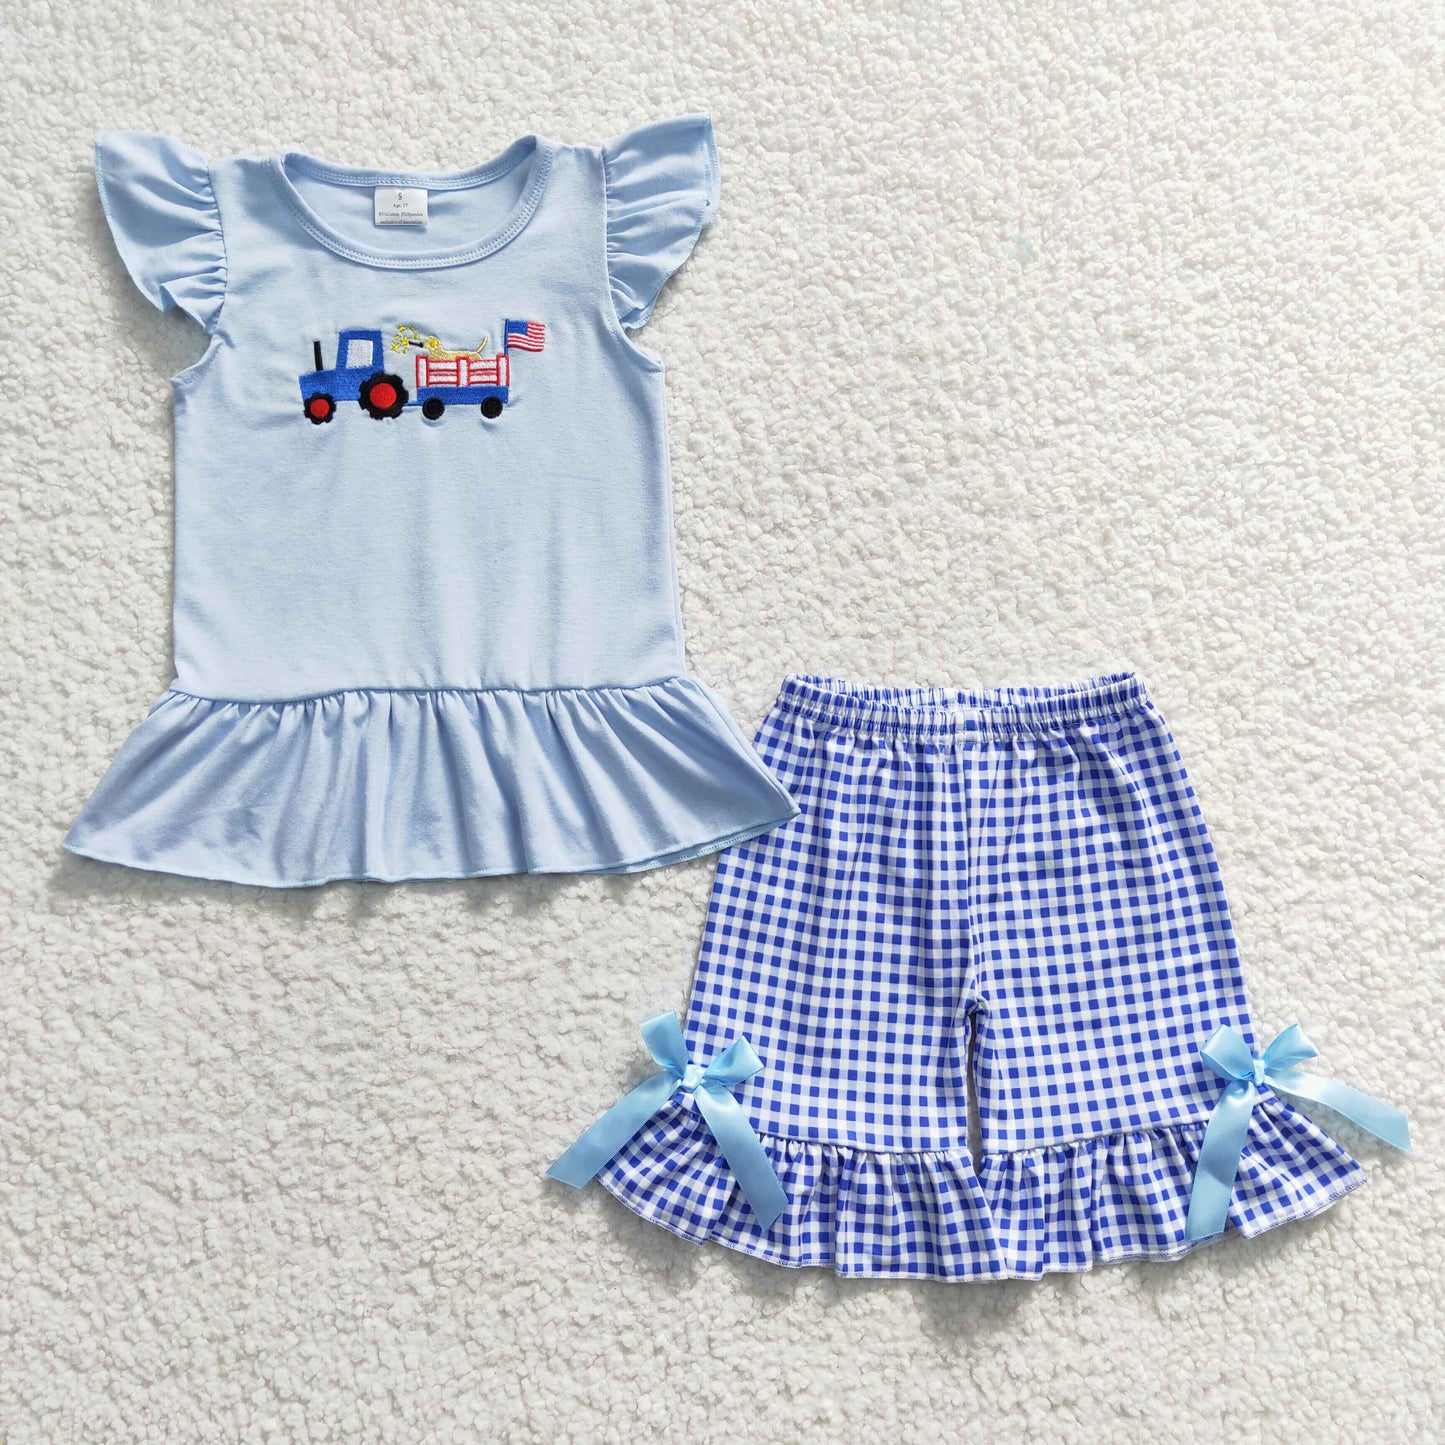 GSSO0206 Girls July 4th Embroidery Shorts Set